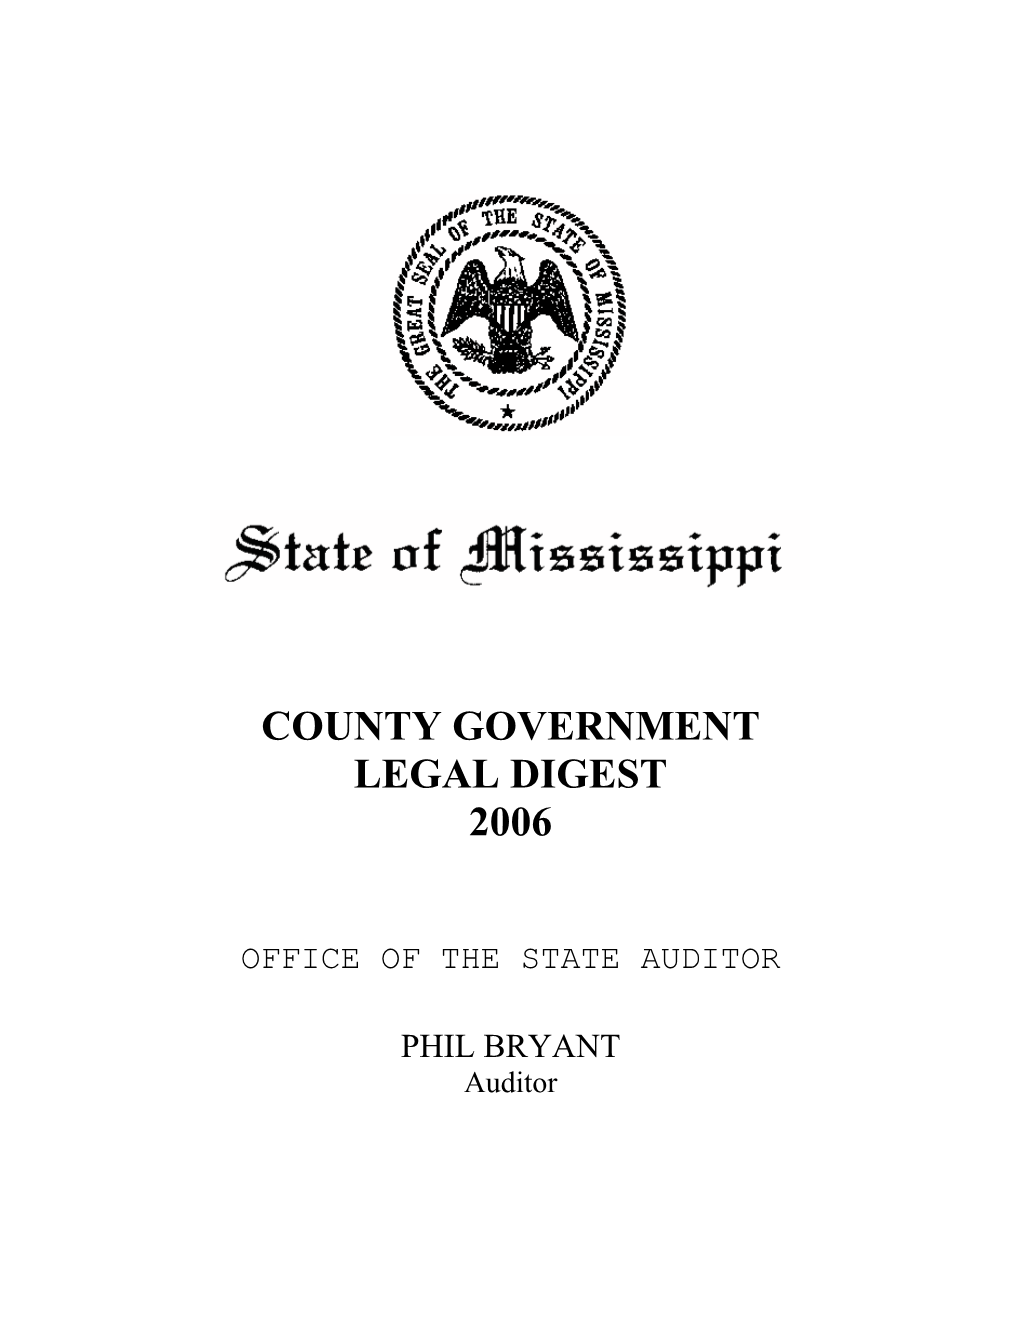 County Government Legal Digest 2006